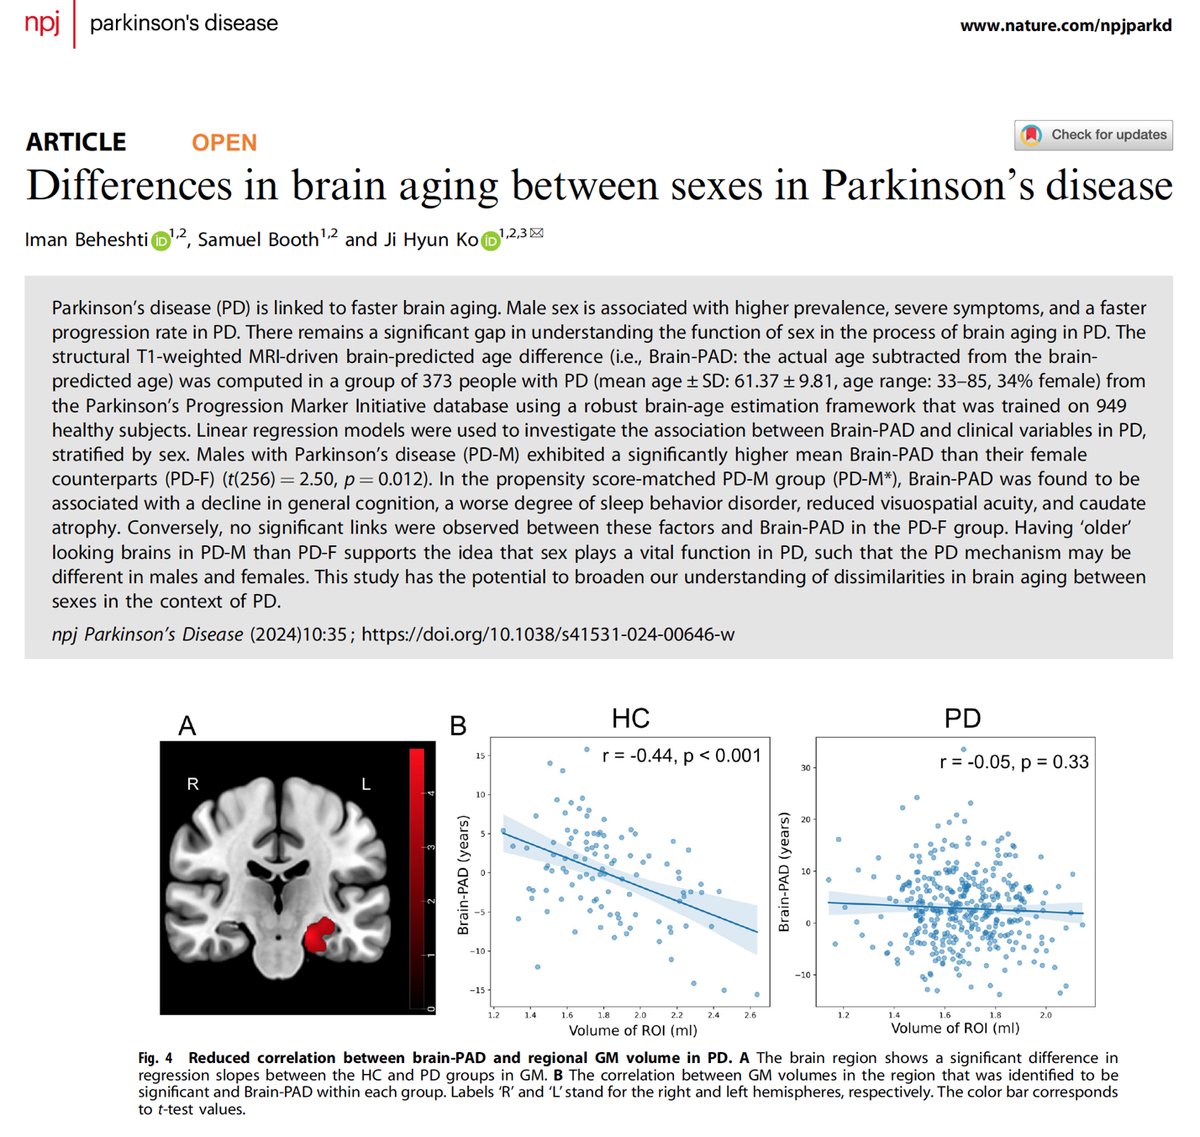 Really excited about our recent paper published in one of the top journals in the area of Parkinson's disease (npj Parkinson's Disease), which investigates sex differences in PD using brain age measures. Link: nature.com/articles/s4153…
@Nature_NPJ, @umanitoba, @um_research